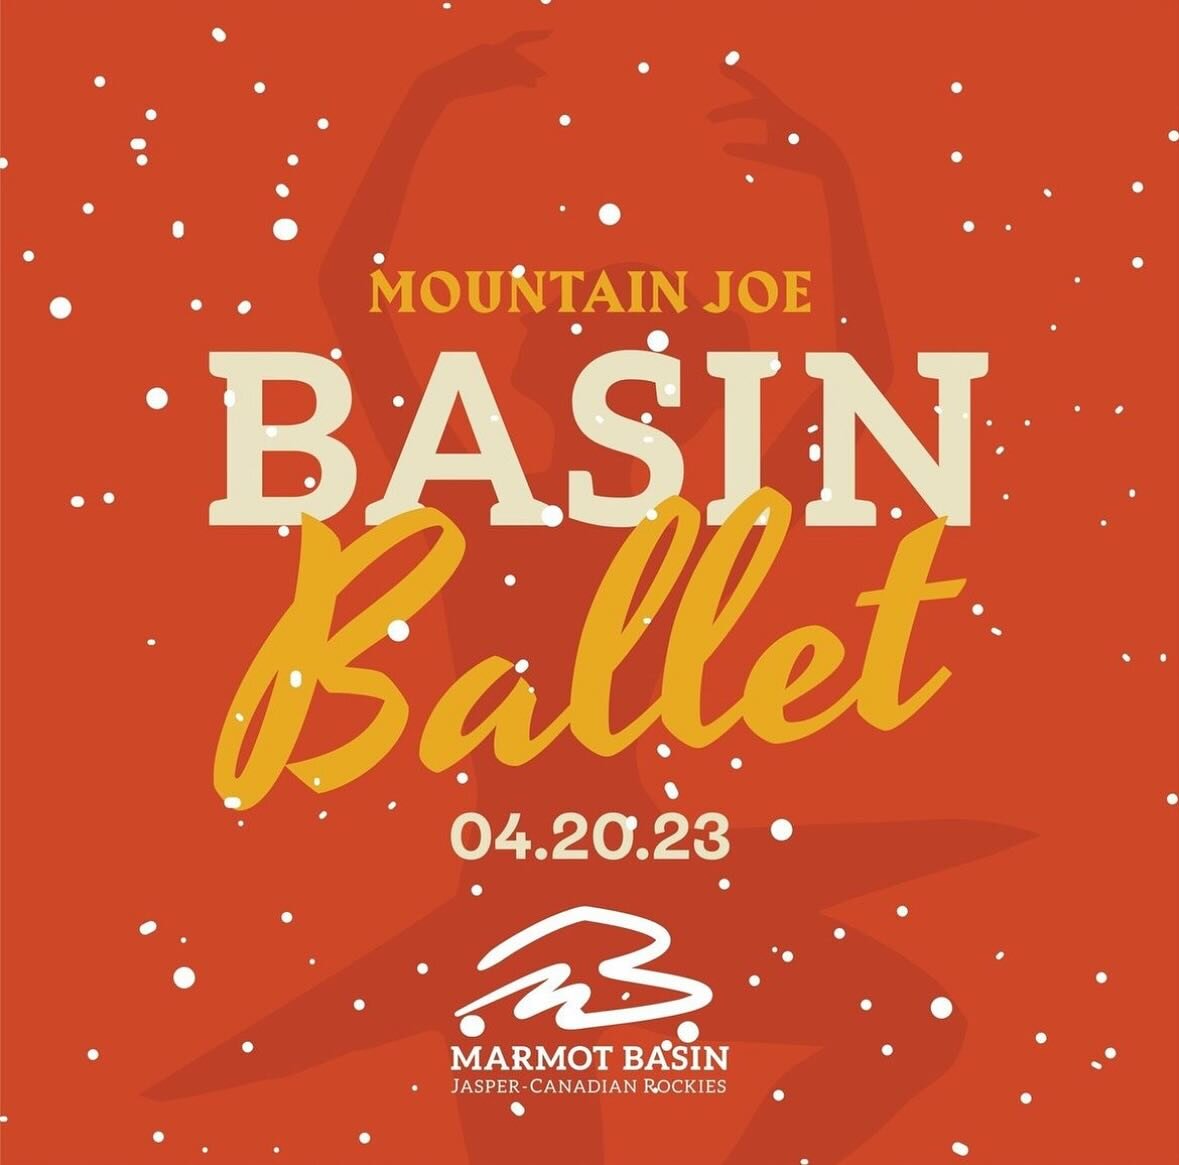 The Ballet is coming to town- and registration opens TODAY! Head over to @marmotbasin or @parkdistillery link in bio for more info!